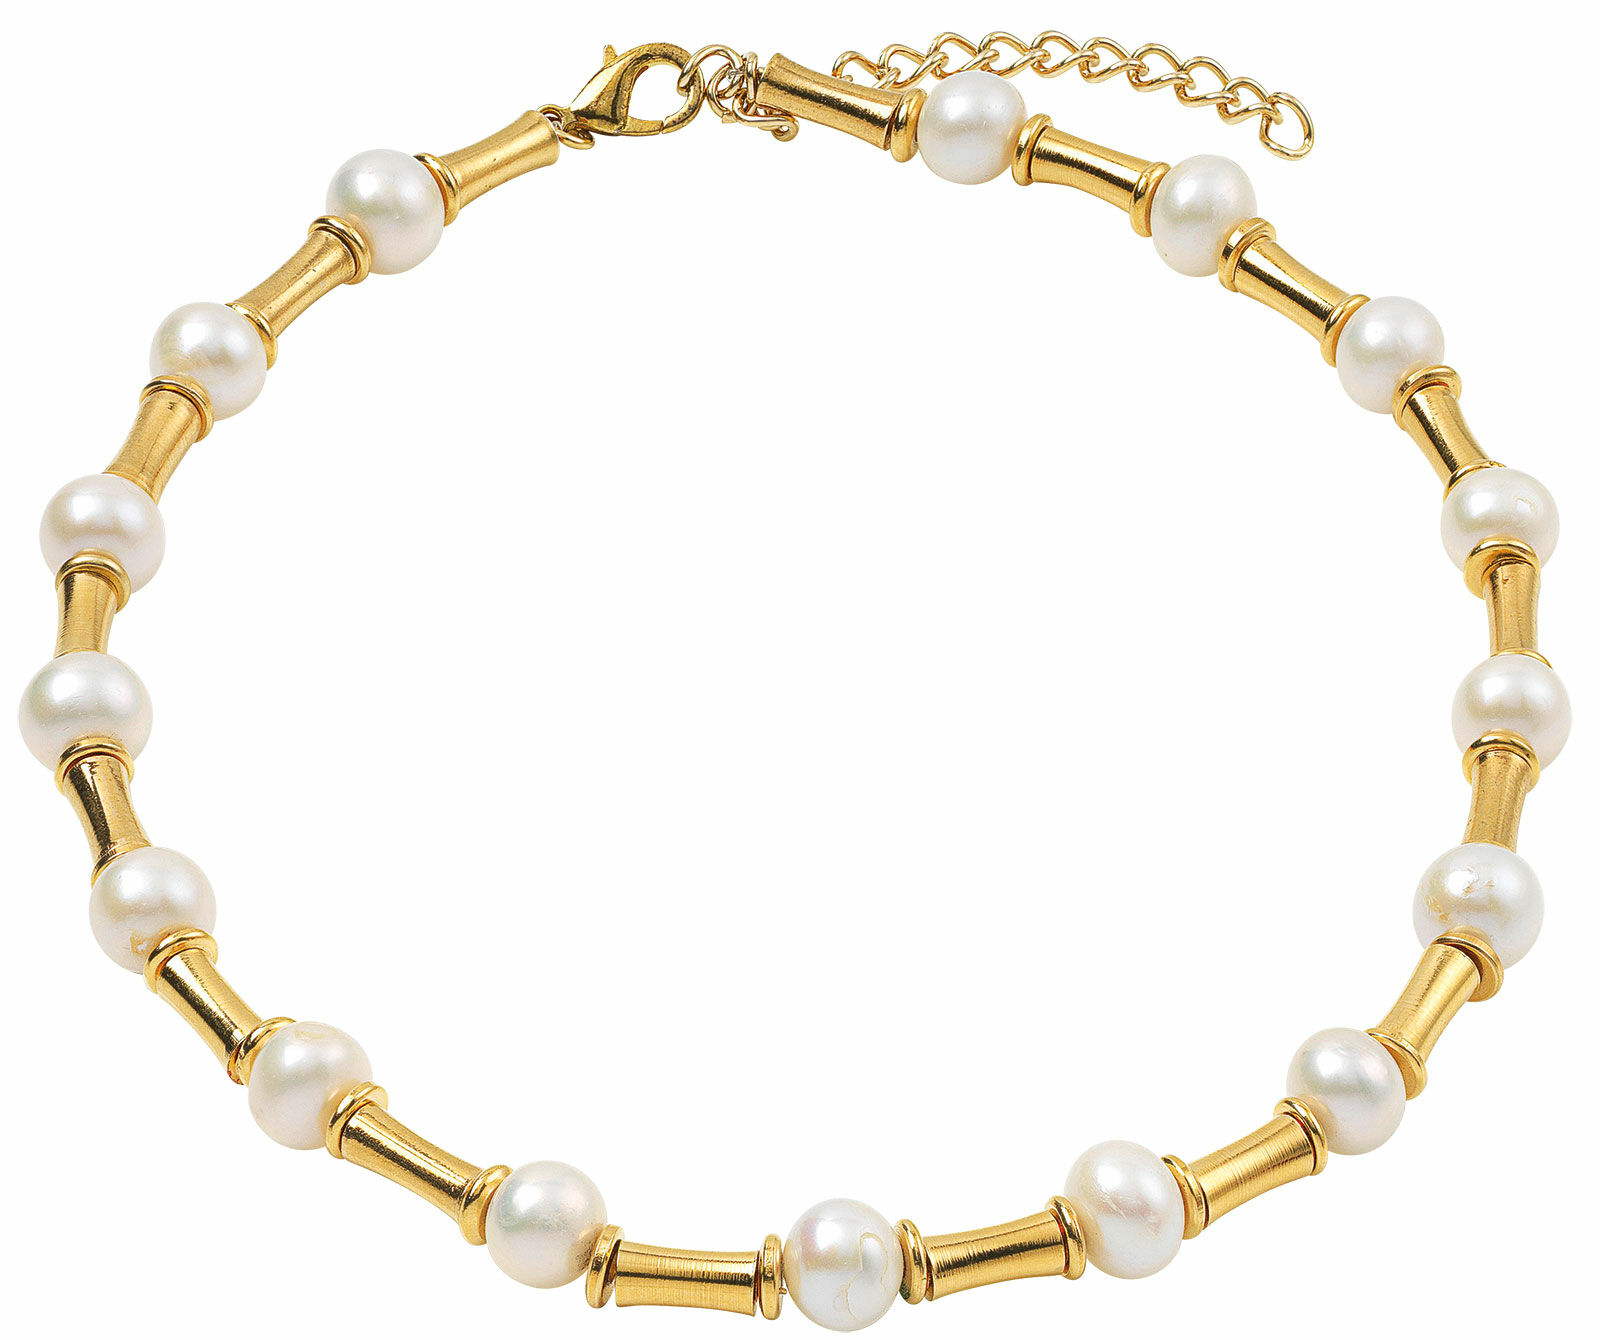 Necklace "Pharaoh White" with cultured pearls by Petra Waszak